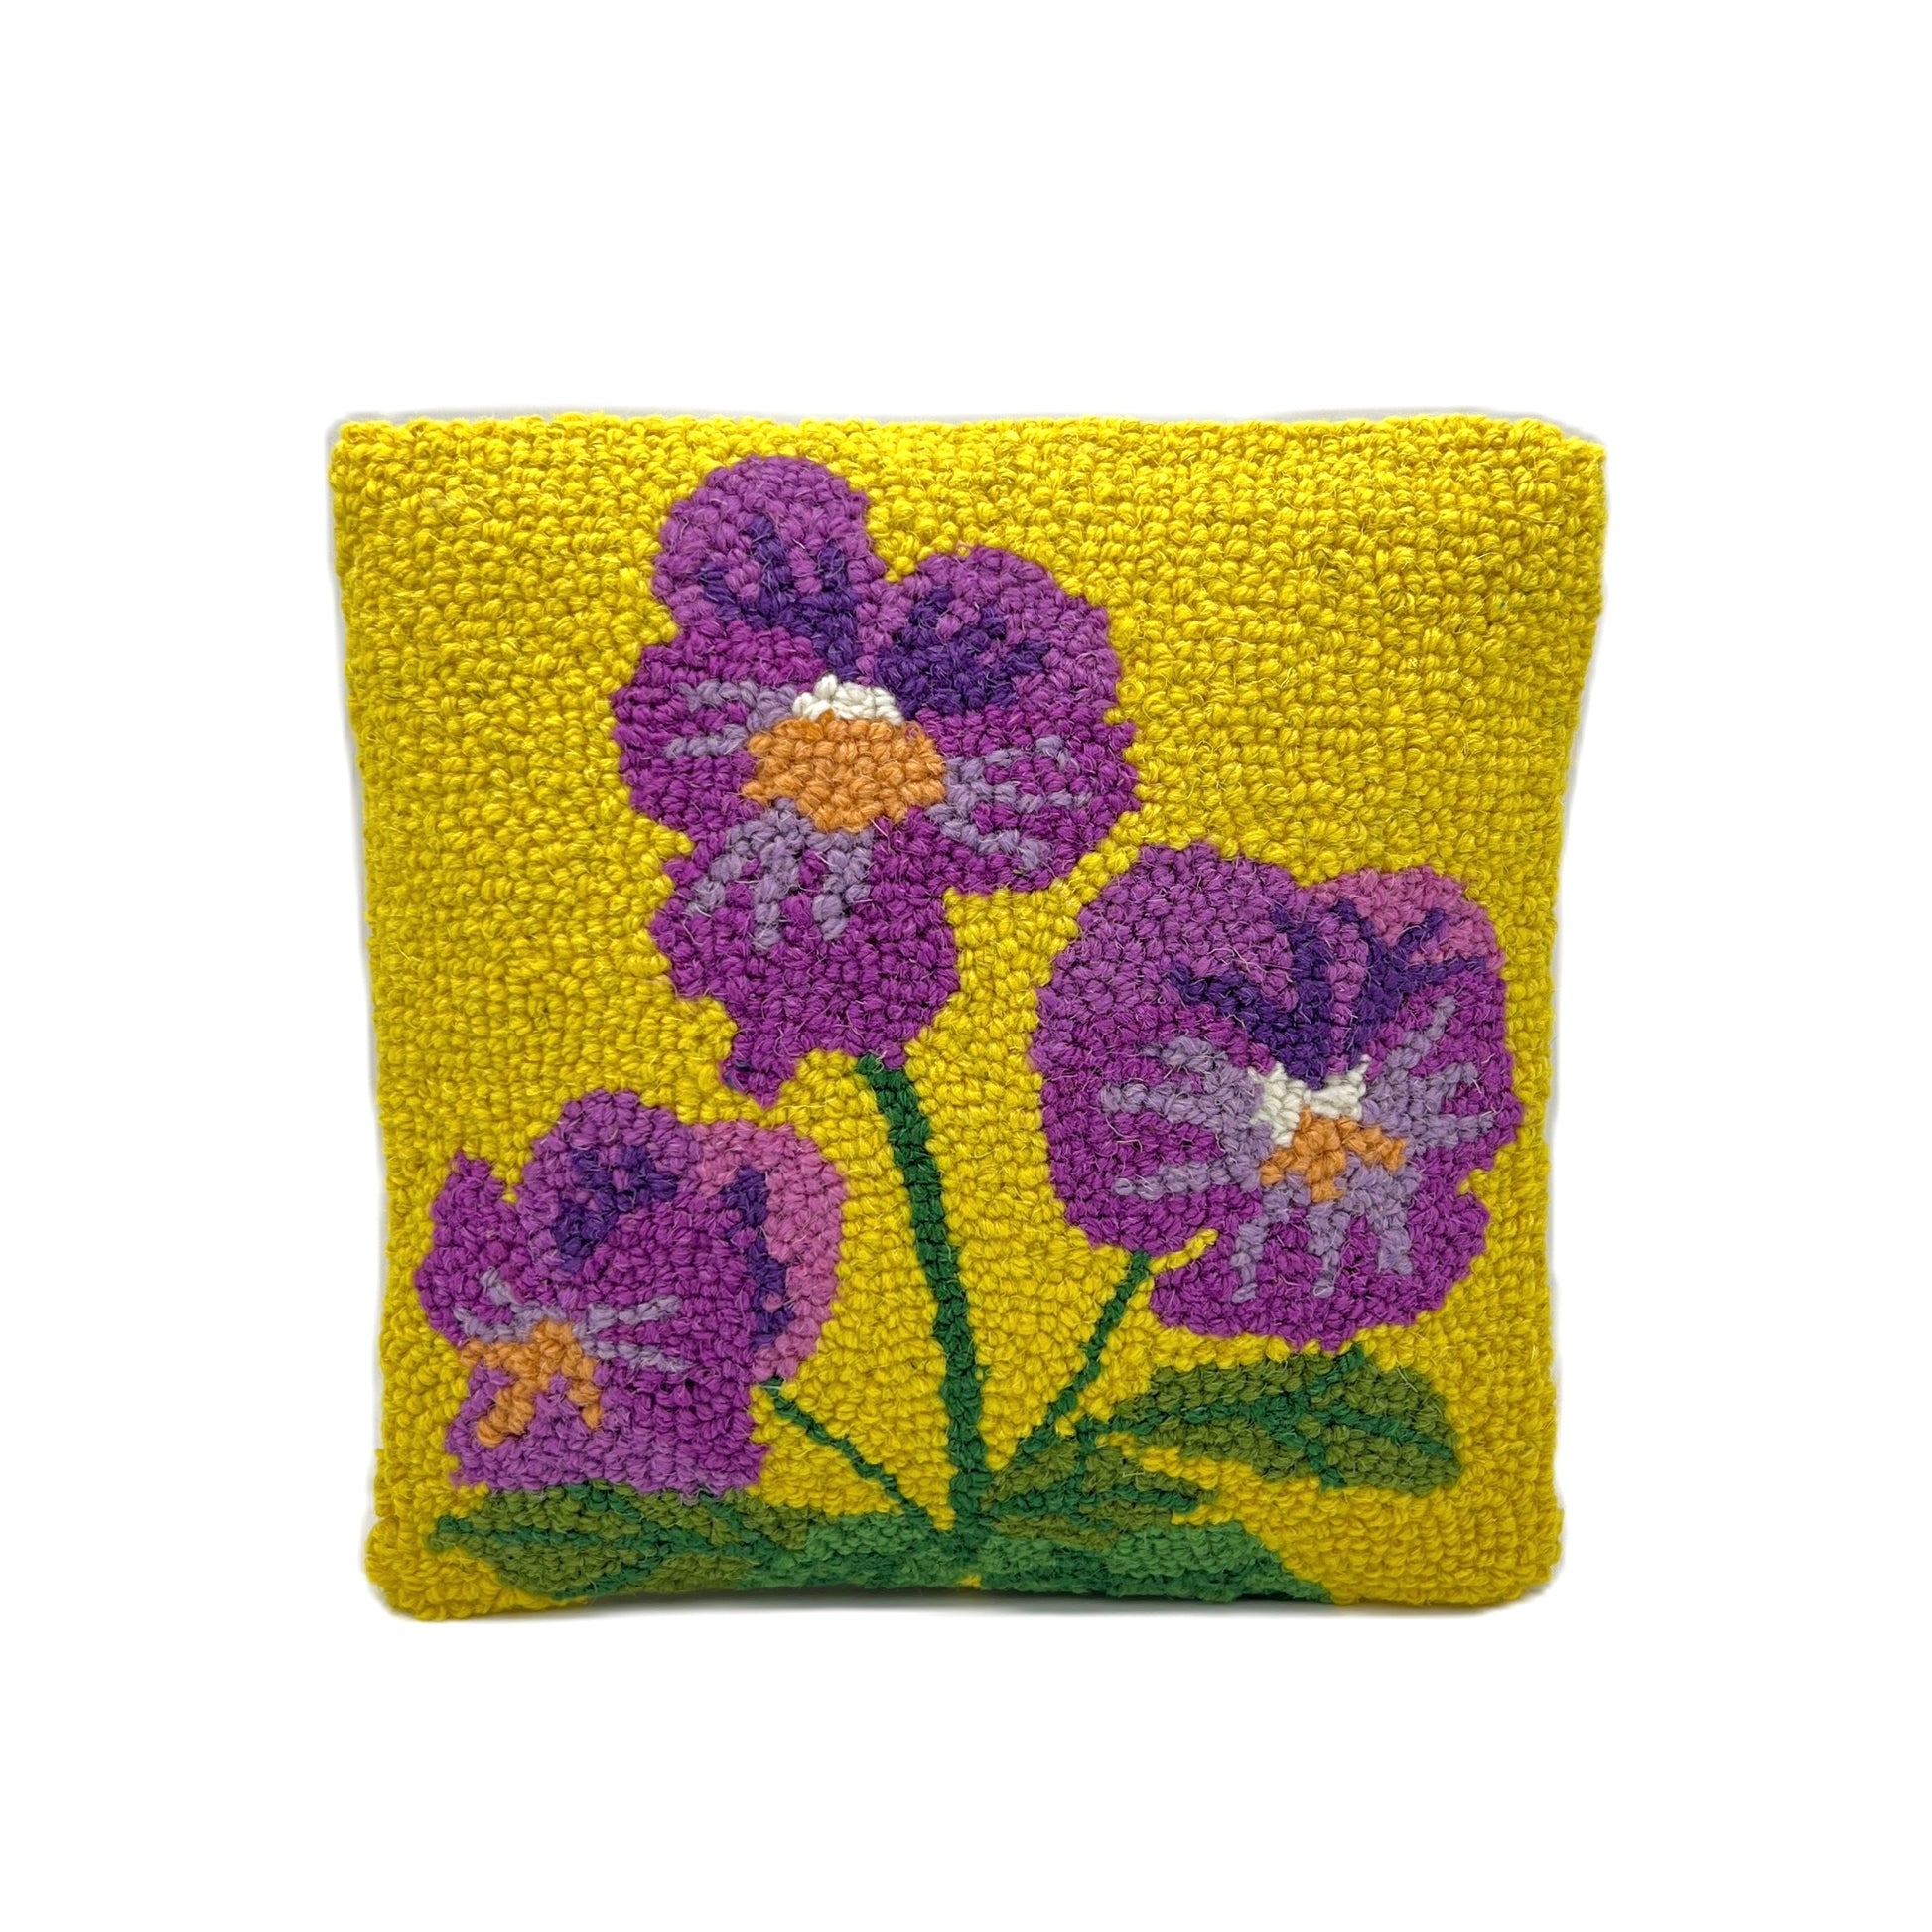 Pansy Wool Hooked Pillow Pillow 1818 Farms   